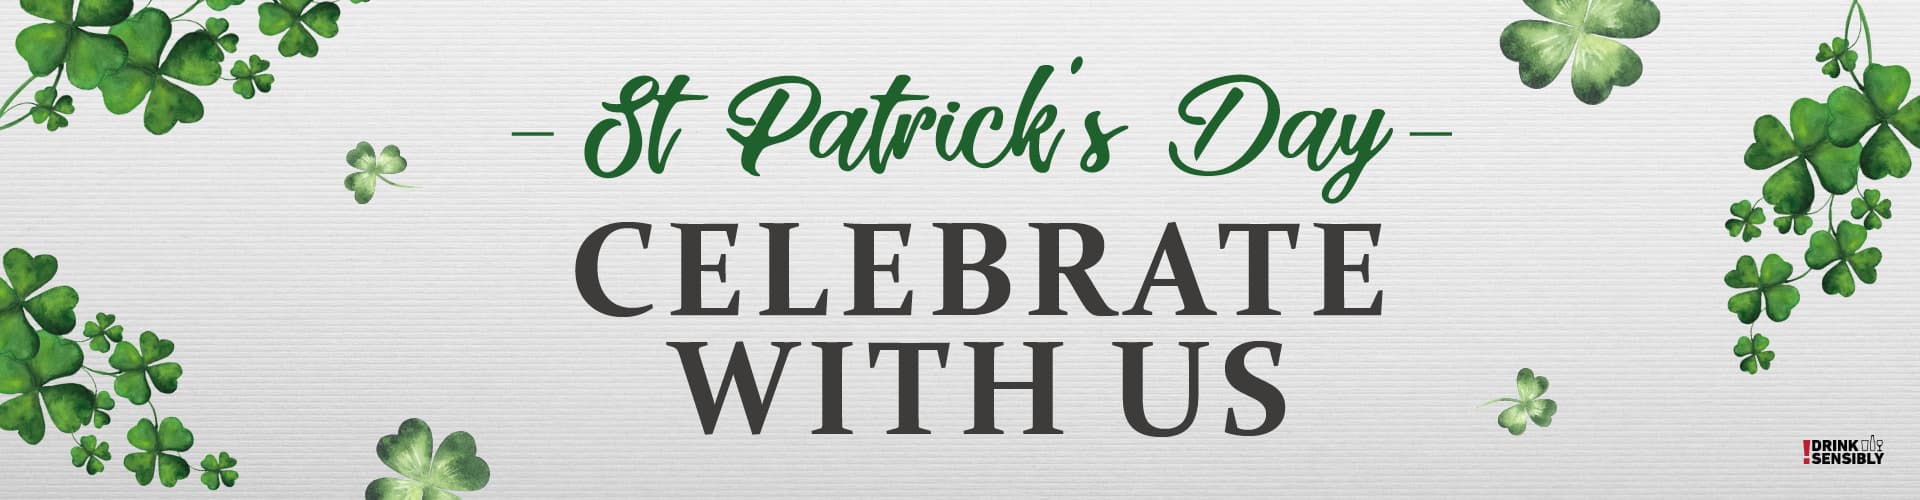 Celebrate St Patrick's Day in our pubs